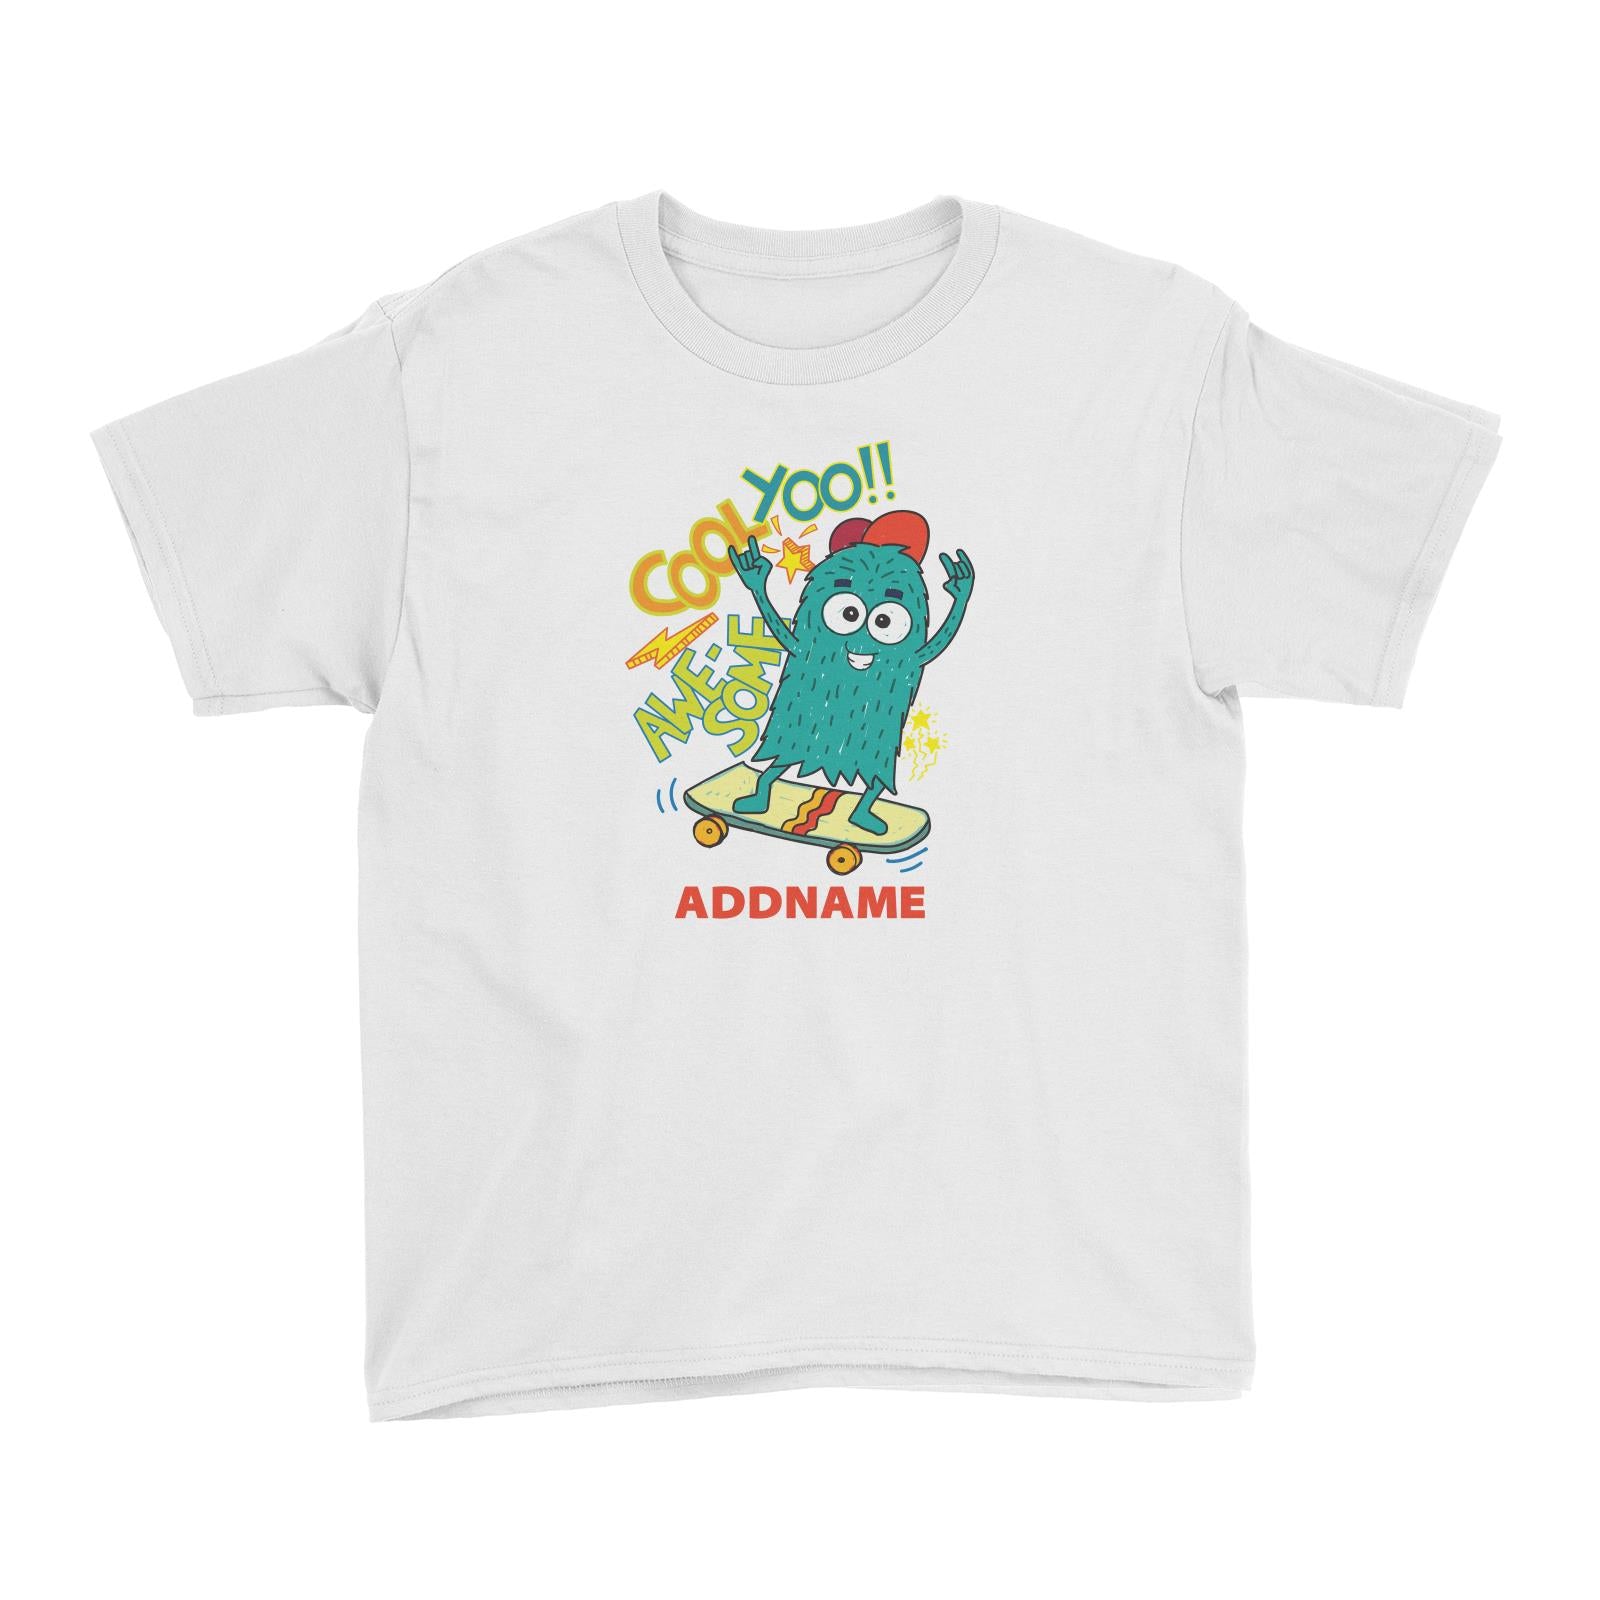 Cool Cute Monster Cool Yoo Awesome Skateboard Monster Addname Kid's T-Shirts